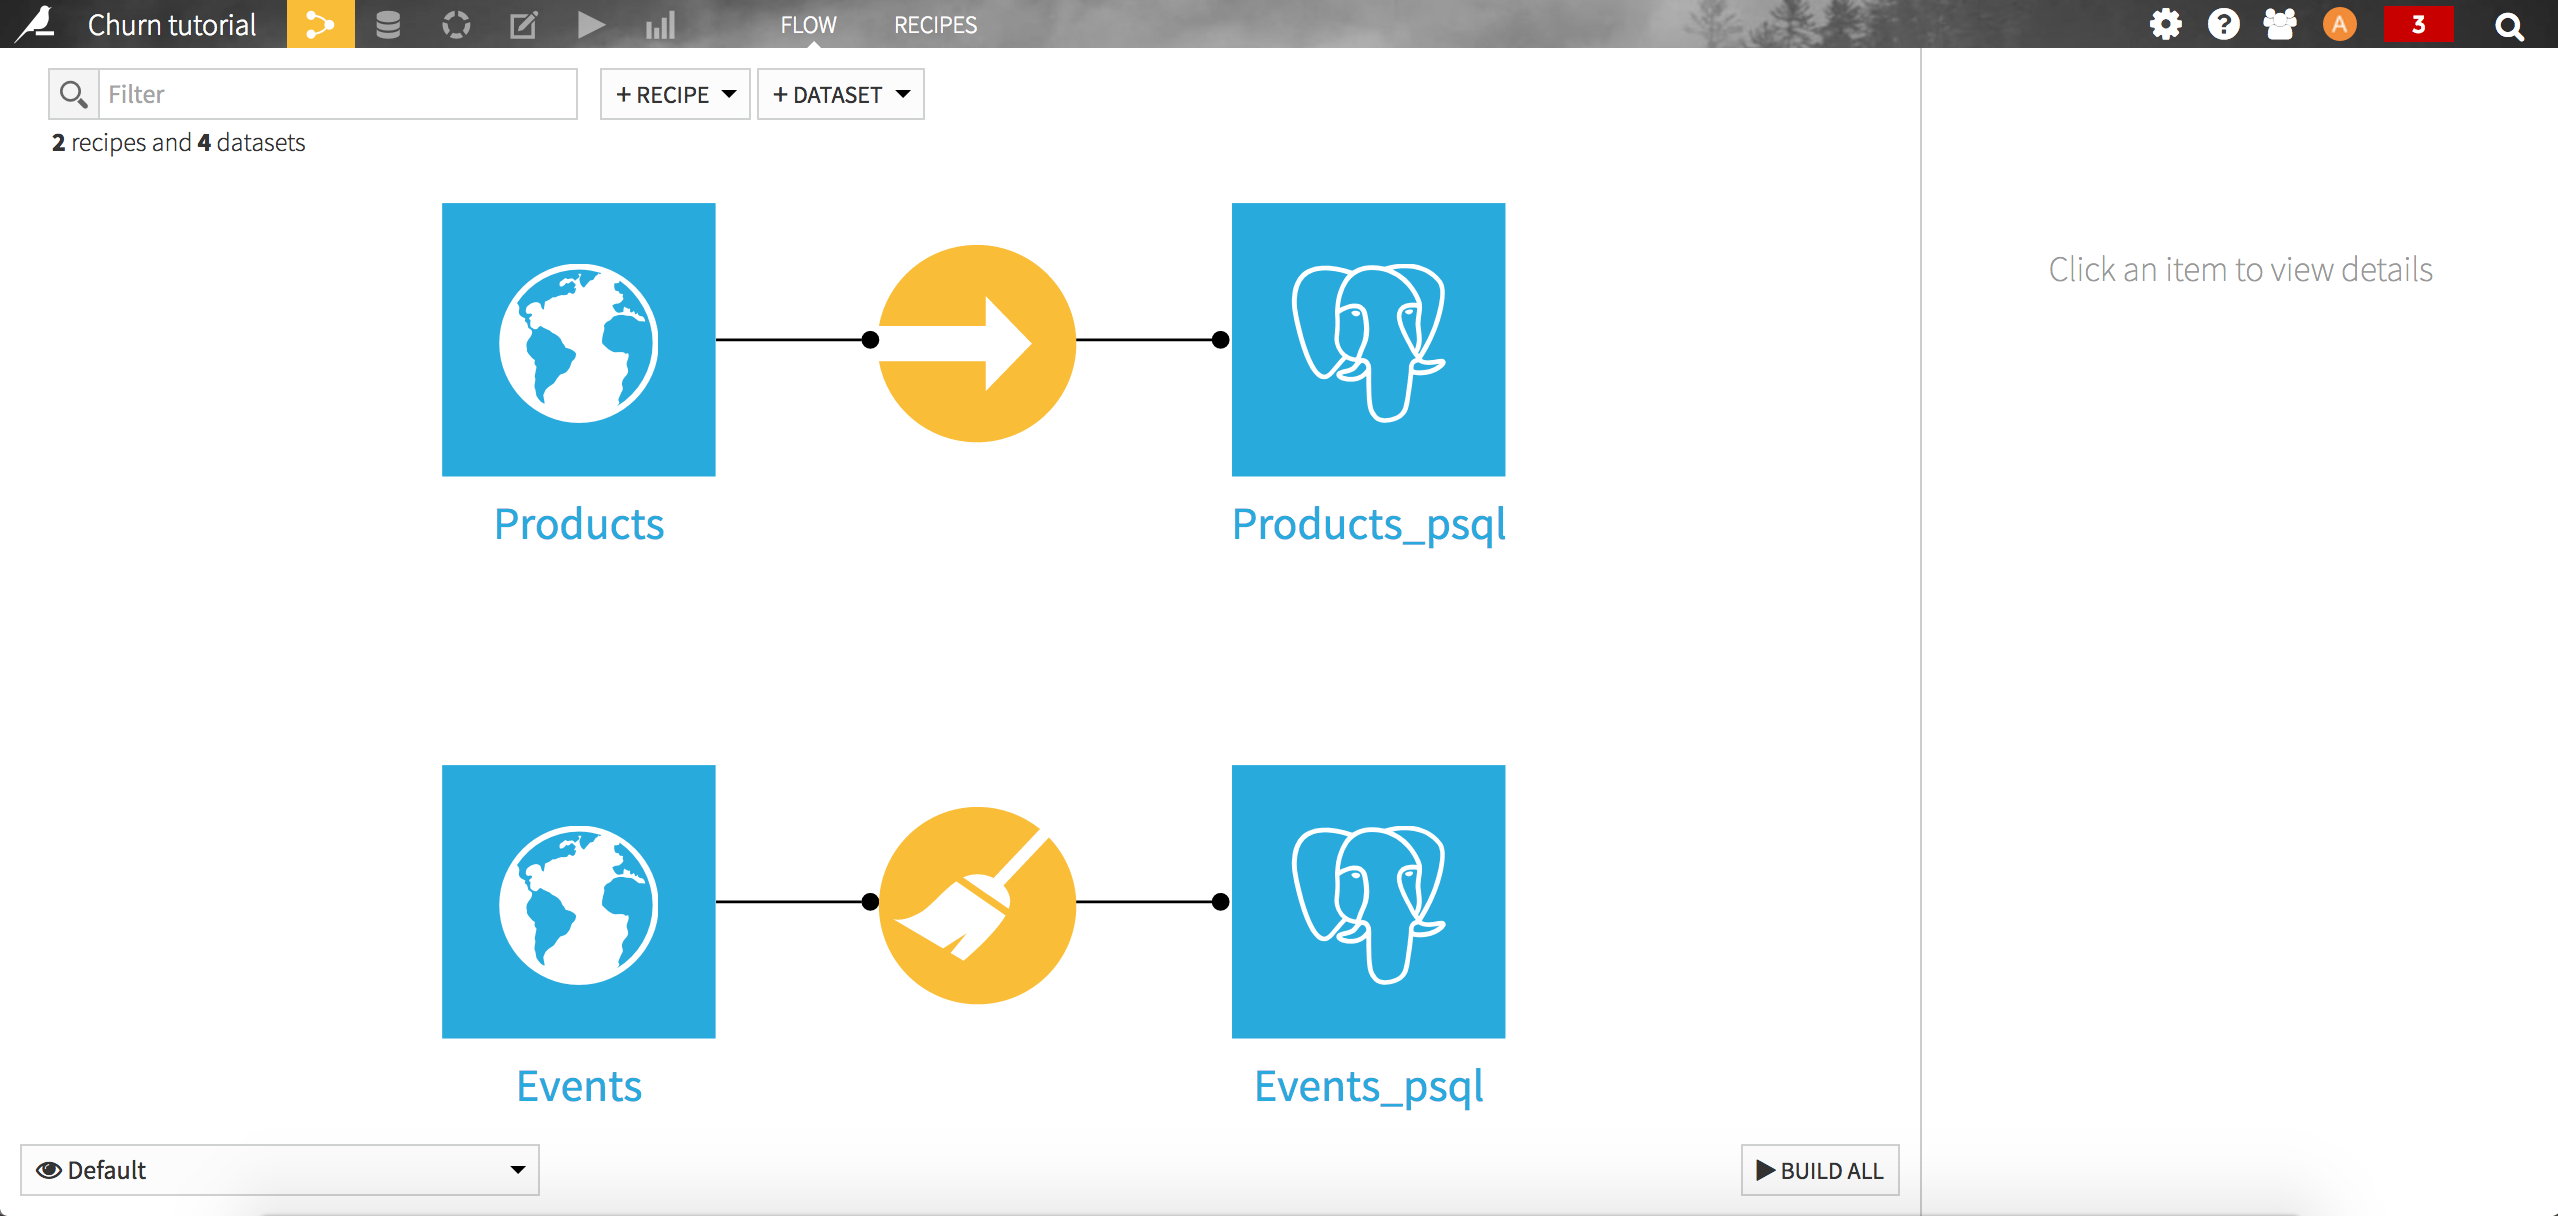 "Screenshot of the DSS project flow"